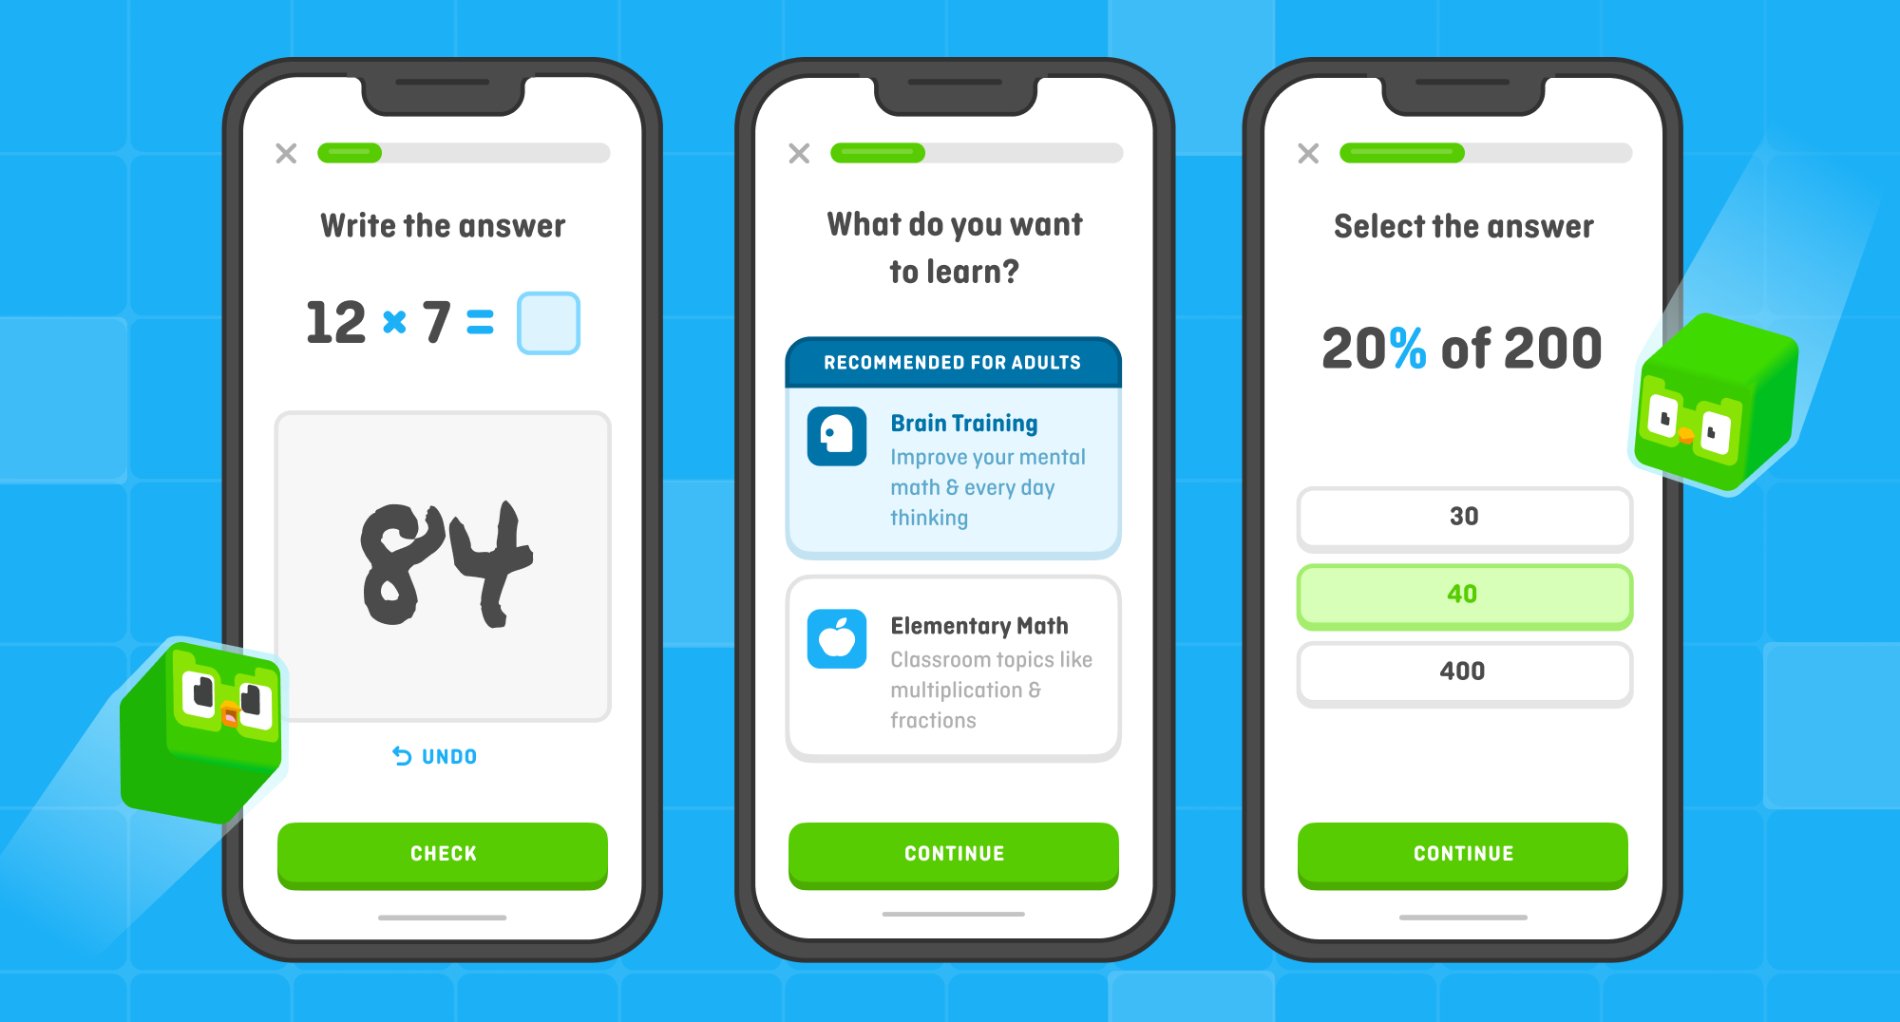 Duolingo Math Helps Build Skills for Both Young and Adult Learners